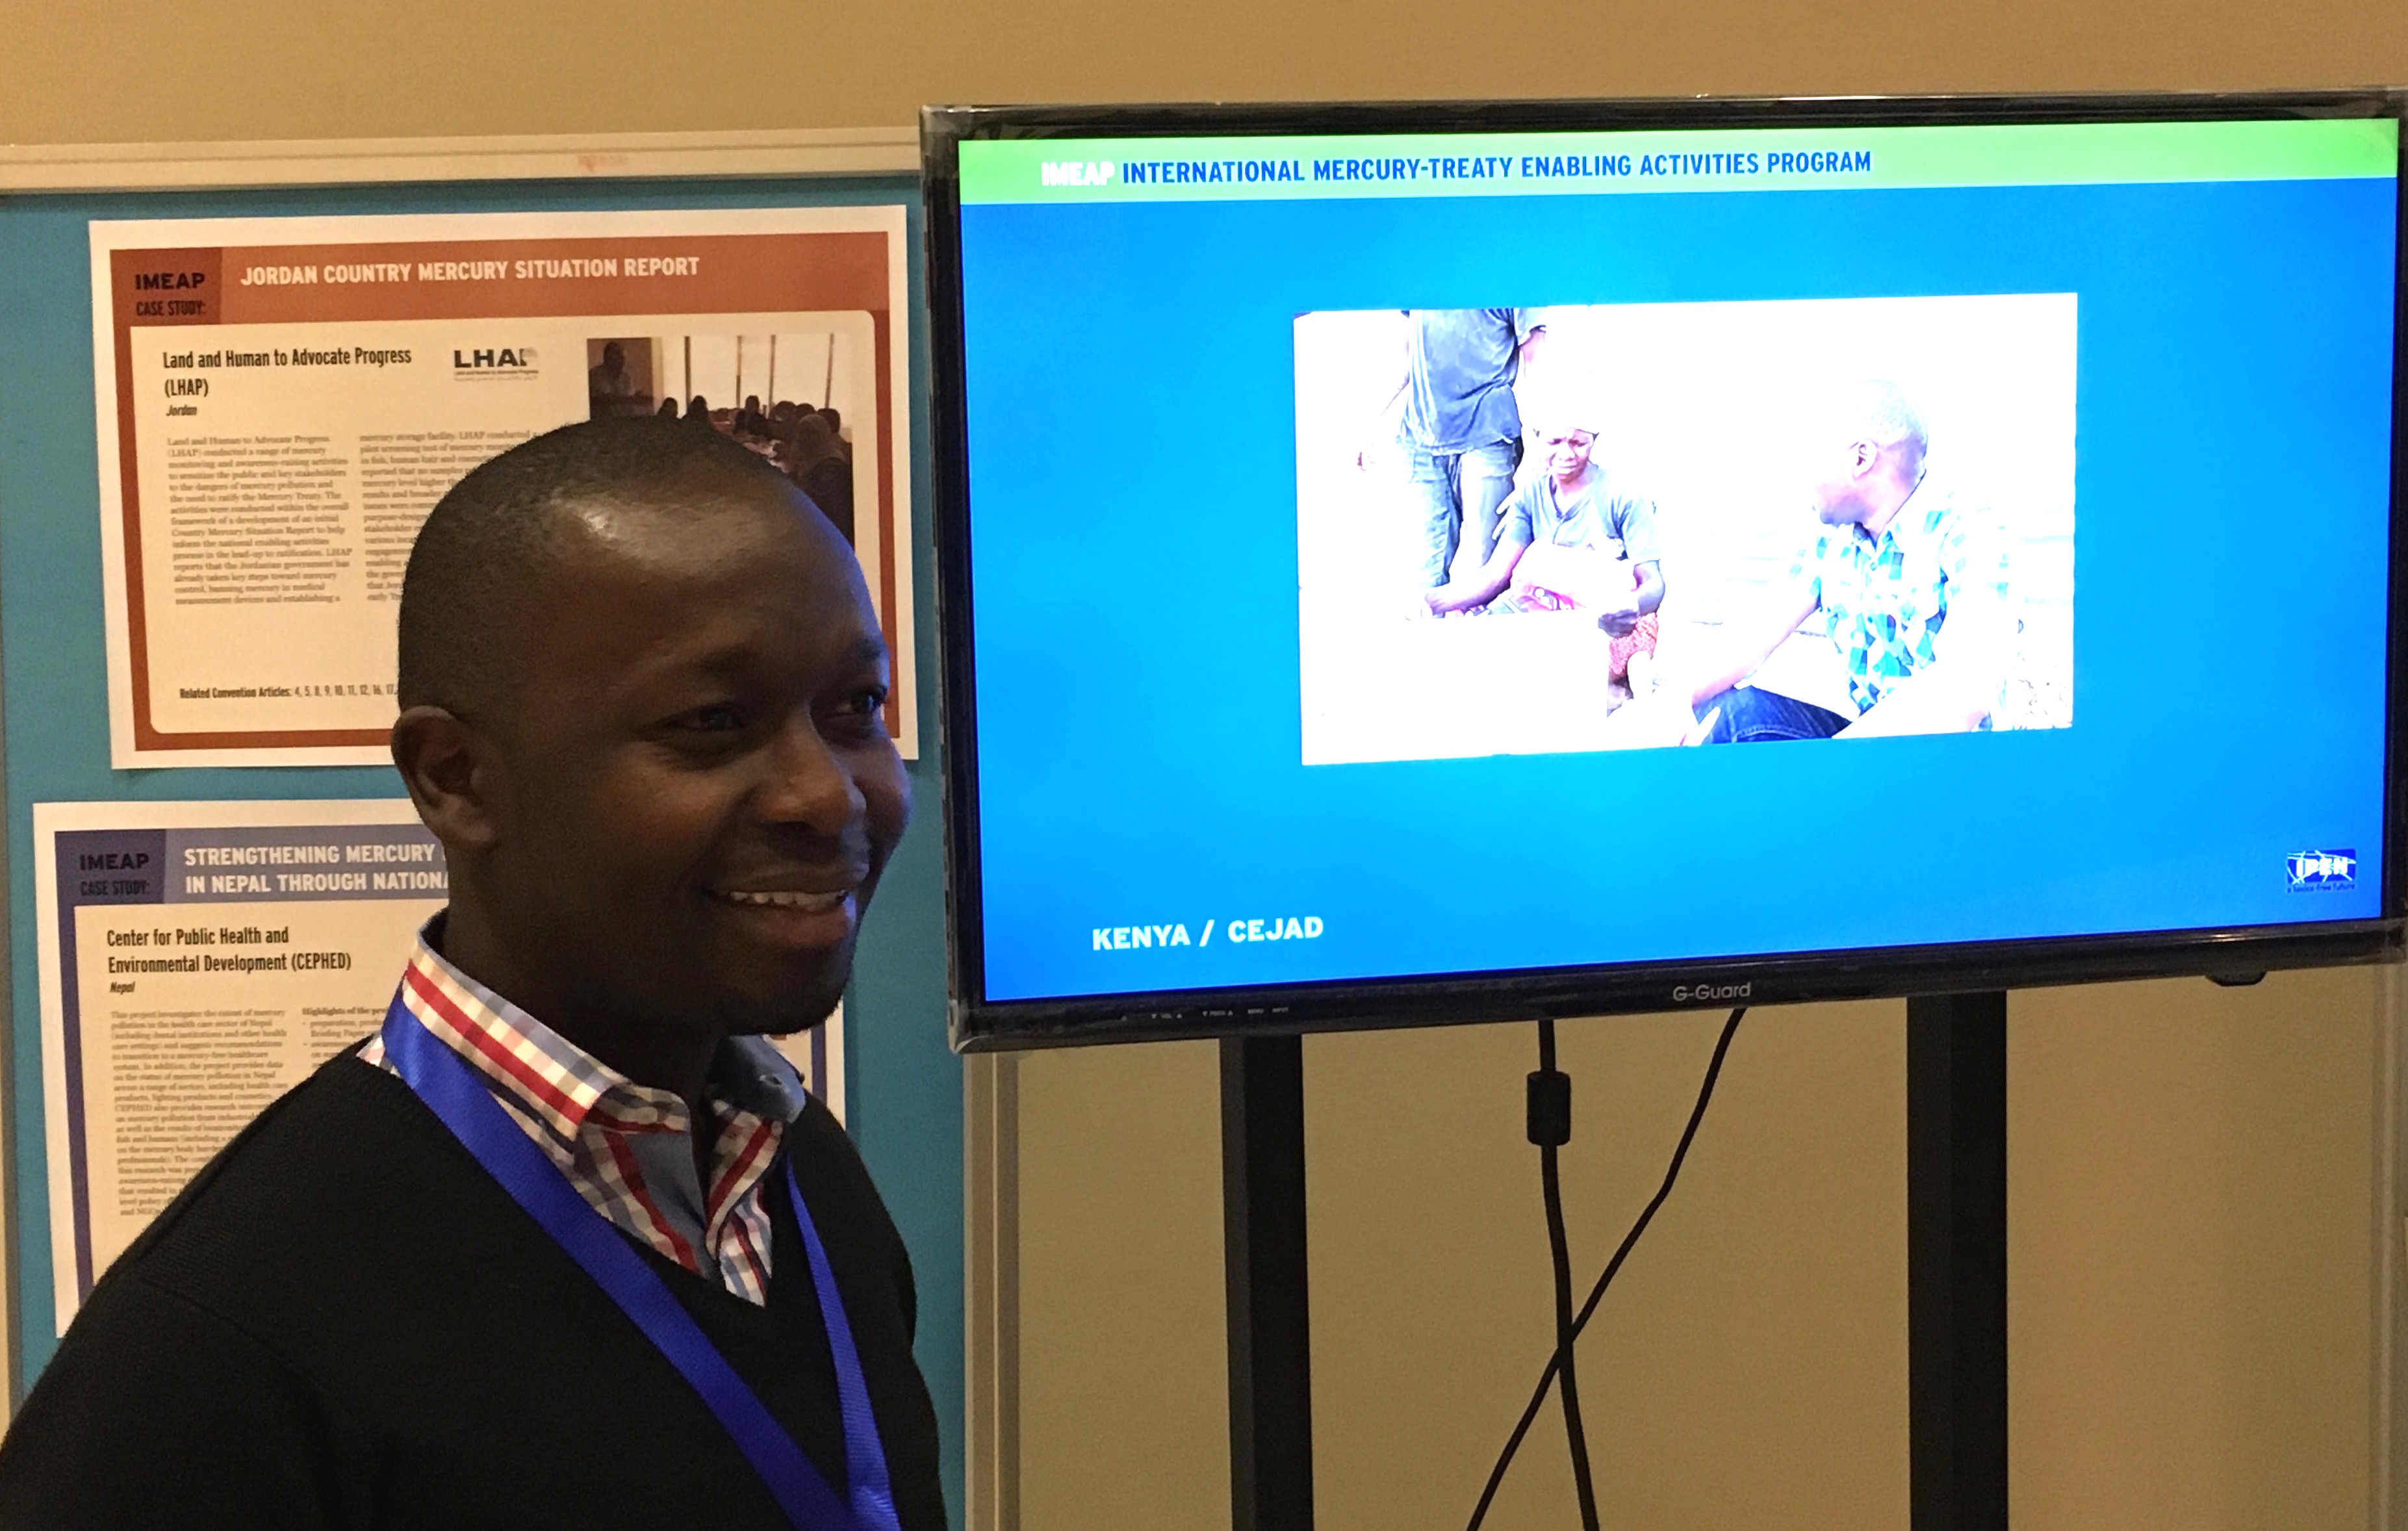 Griffins Ochieng (CEJAD) standing near the ASGM-related video that CEJAD produced for their IMEAP project with IPEN